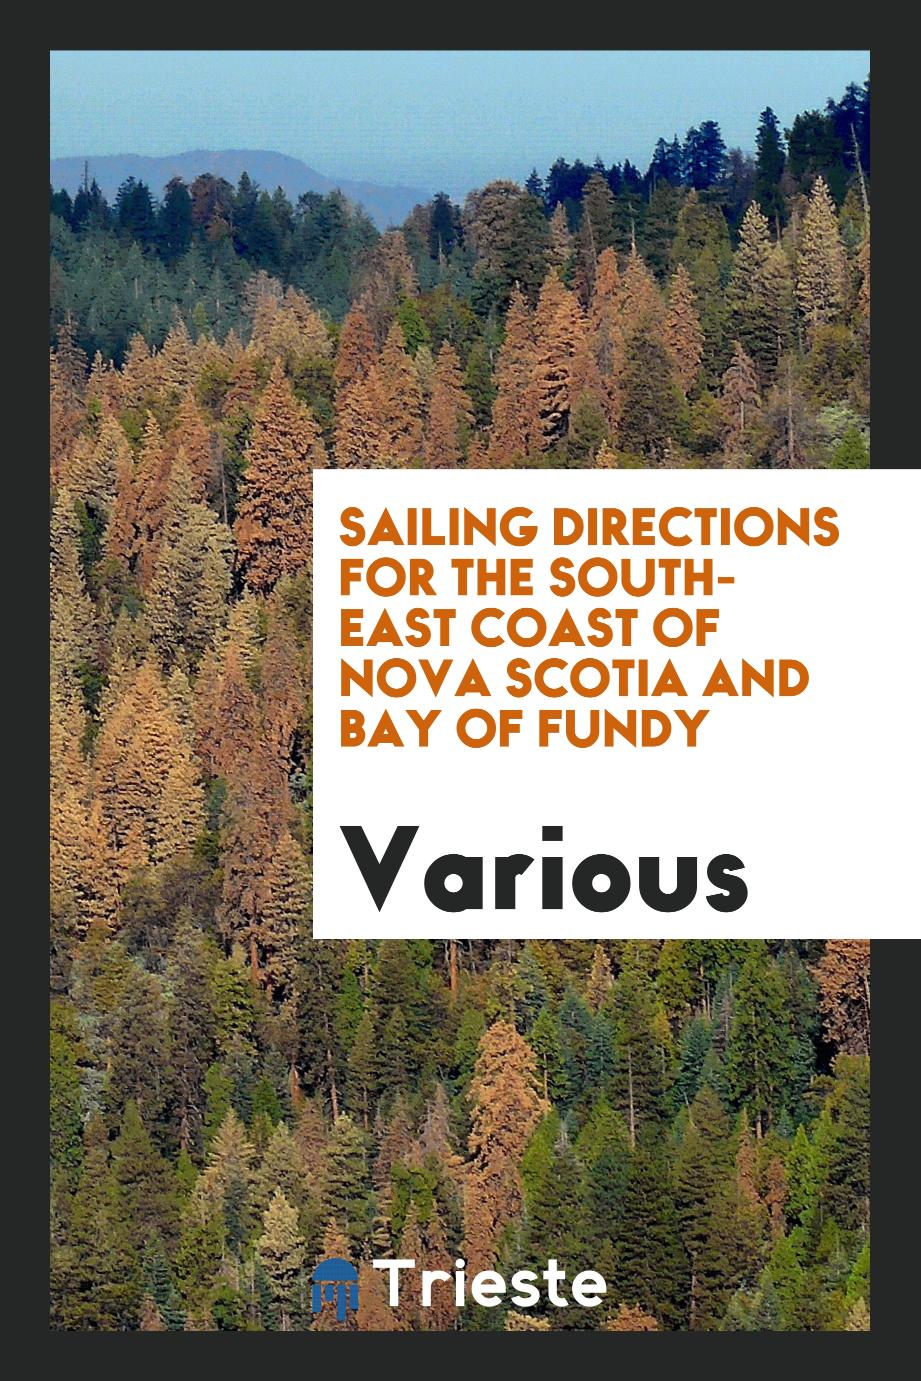 Sailing Directions for the South-East Coast of Nova Scotia and Bay of Fundy